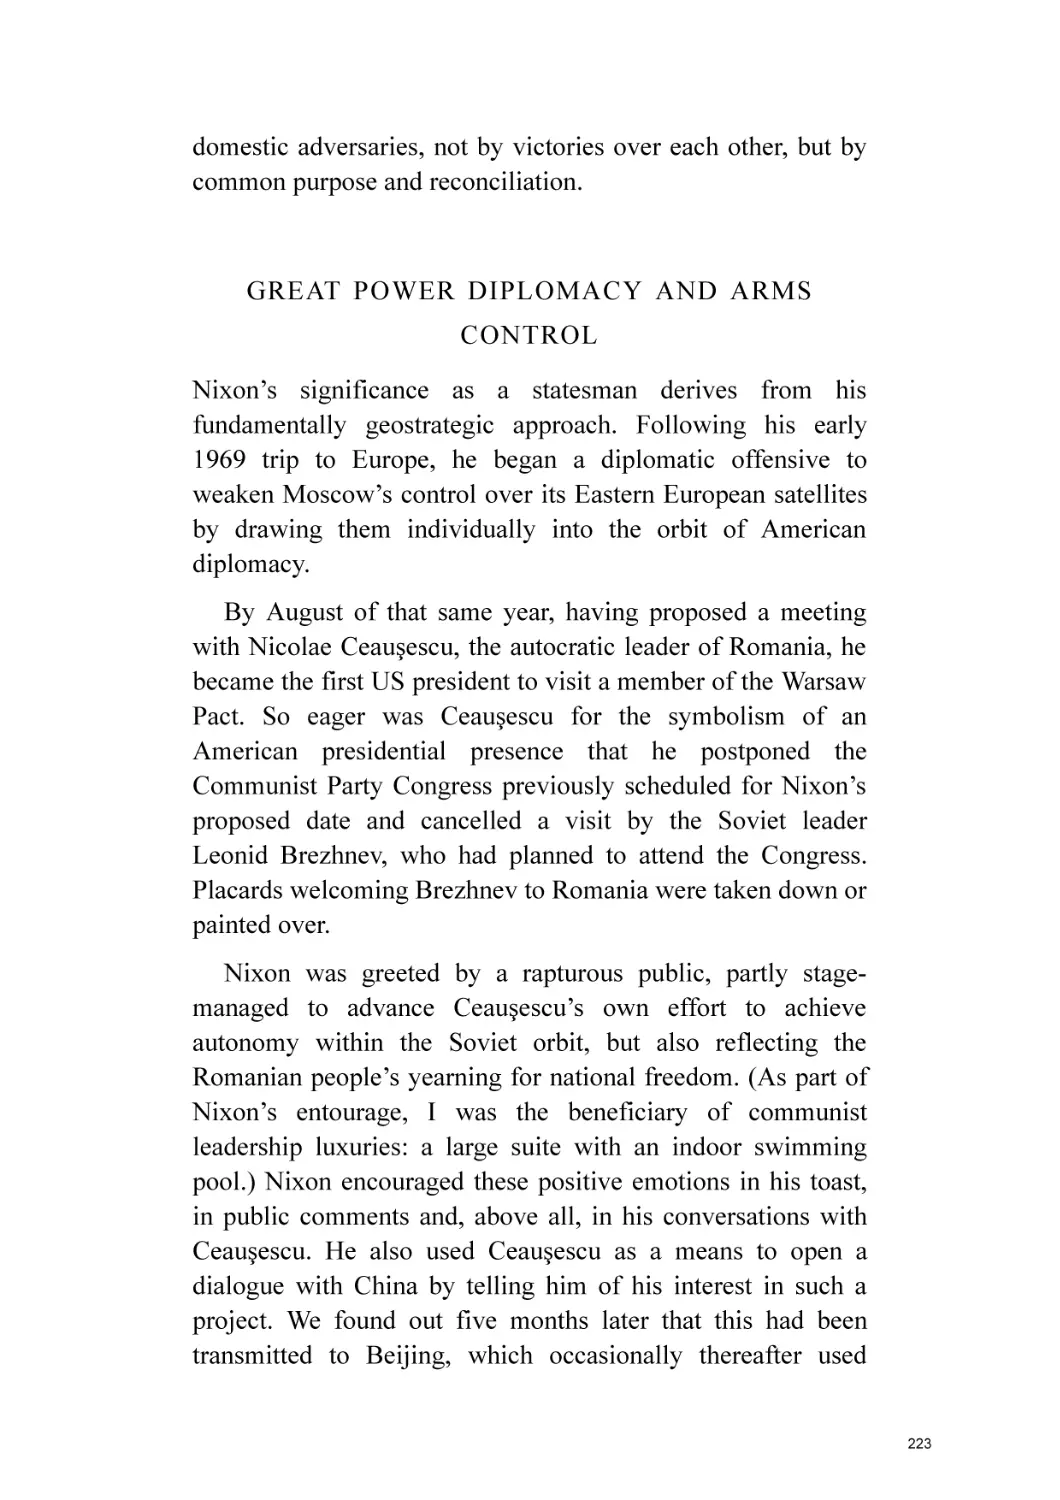 Great Power Diplomacy and Arms control